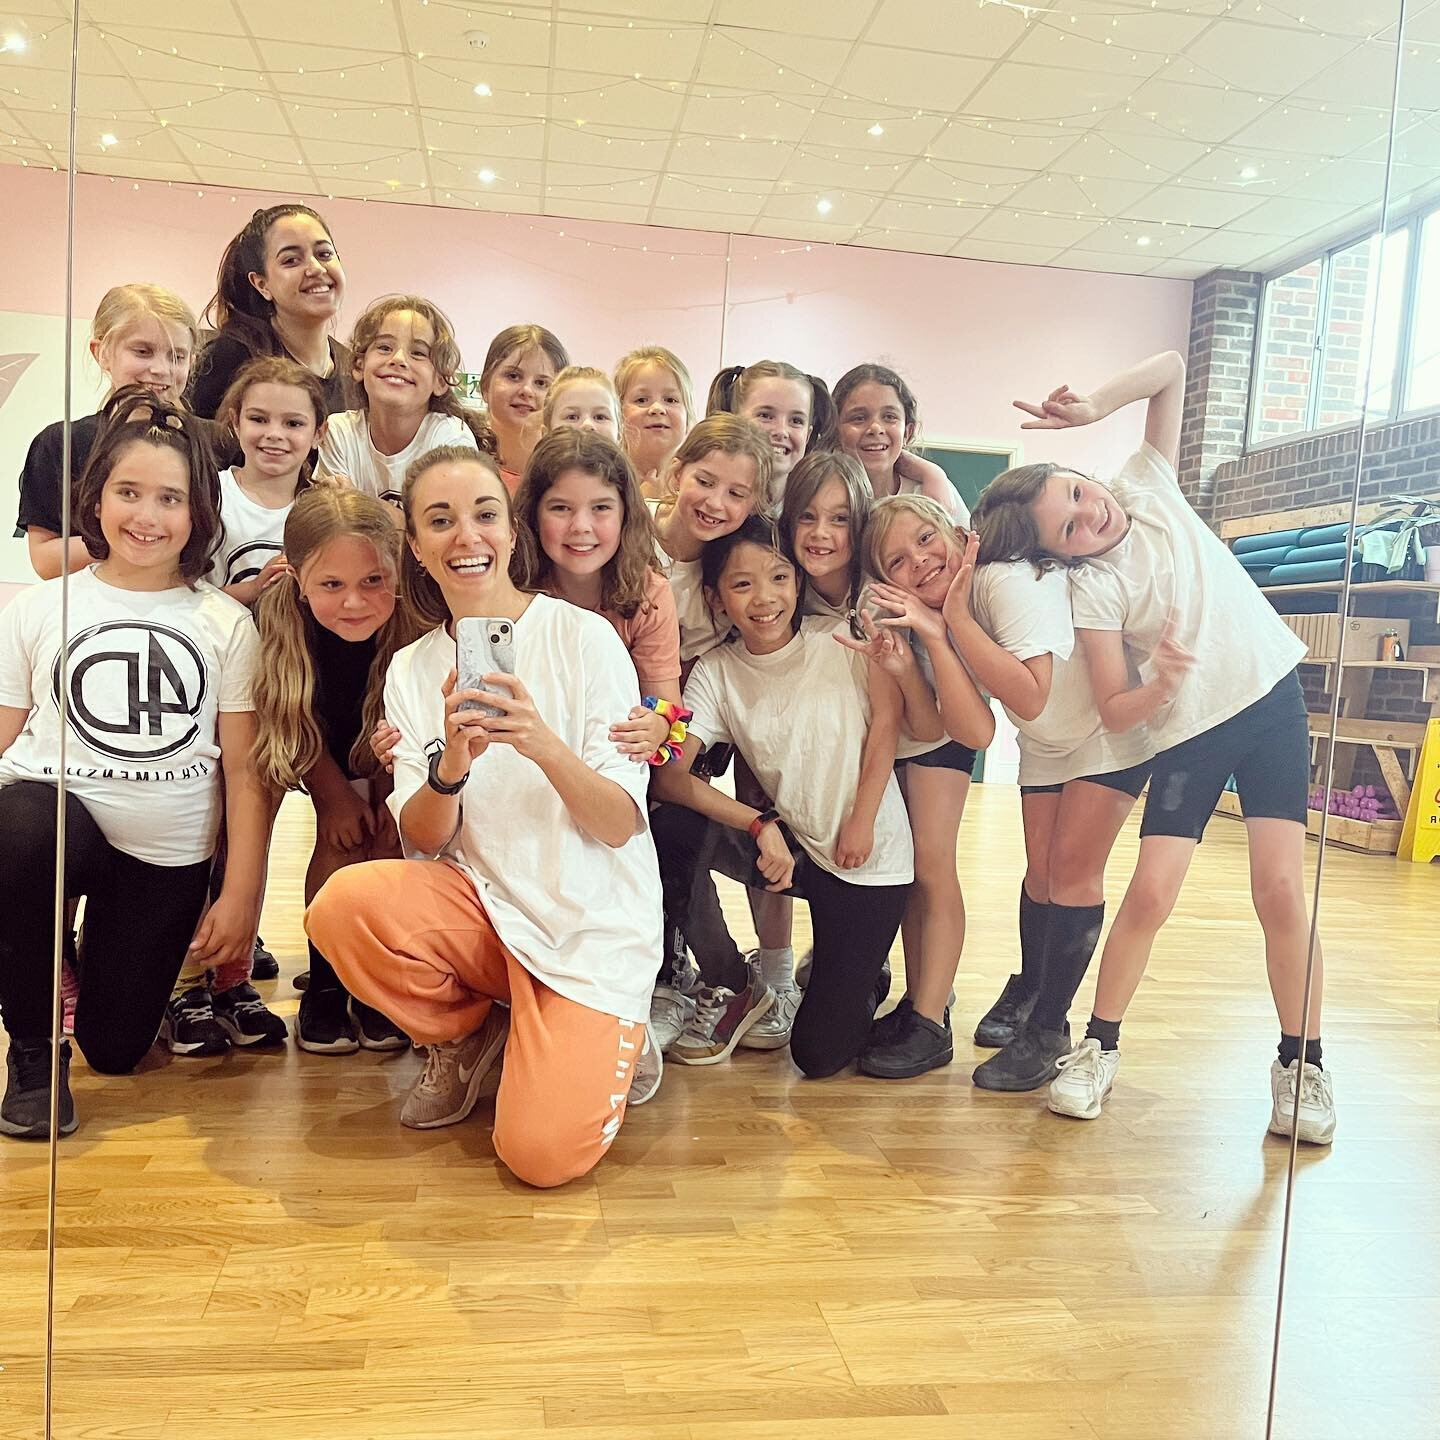 Our lovely cheeky Ely 1DX class! 🐒

All of our students absolutely smashed summer term, we hope you&rsquo;re having an amazing break and we can&rsquo;t wait to dance with some of you tomorrow at summer school! 🕺🏻🪩

#summer #summerhols #schoolhols